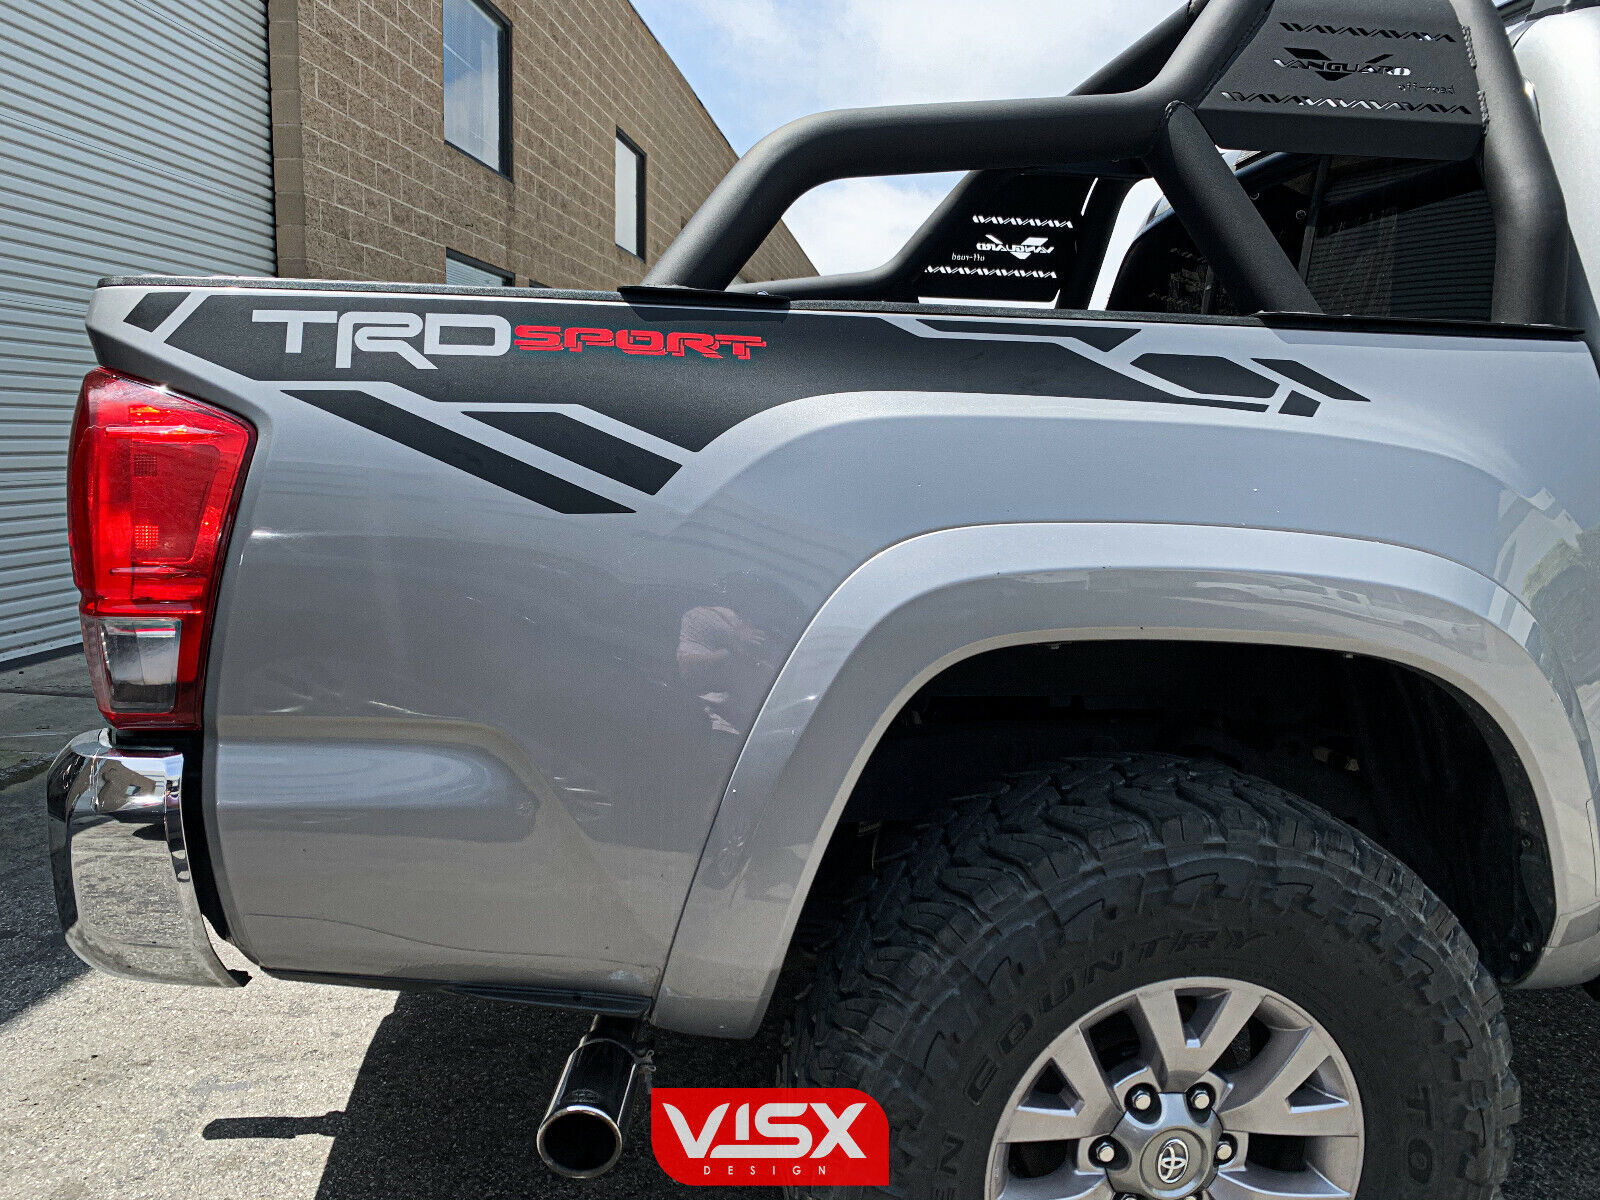 X2 TRD Sport vinyl decals for 2013-2019 Toyota Tacoma bed side 